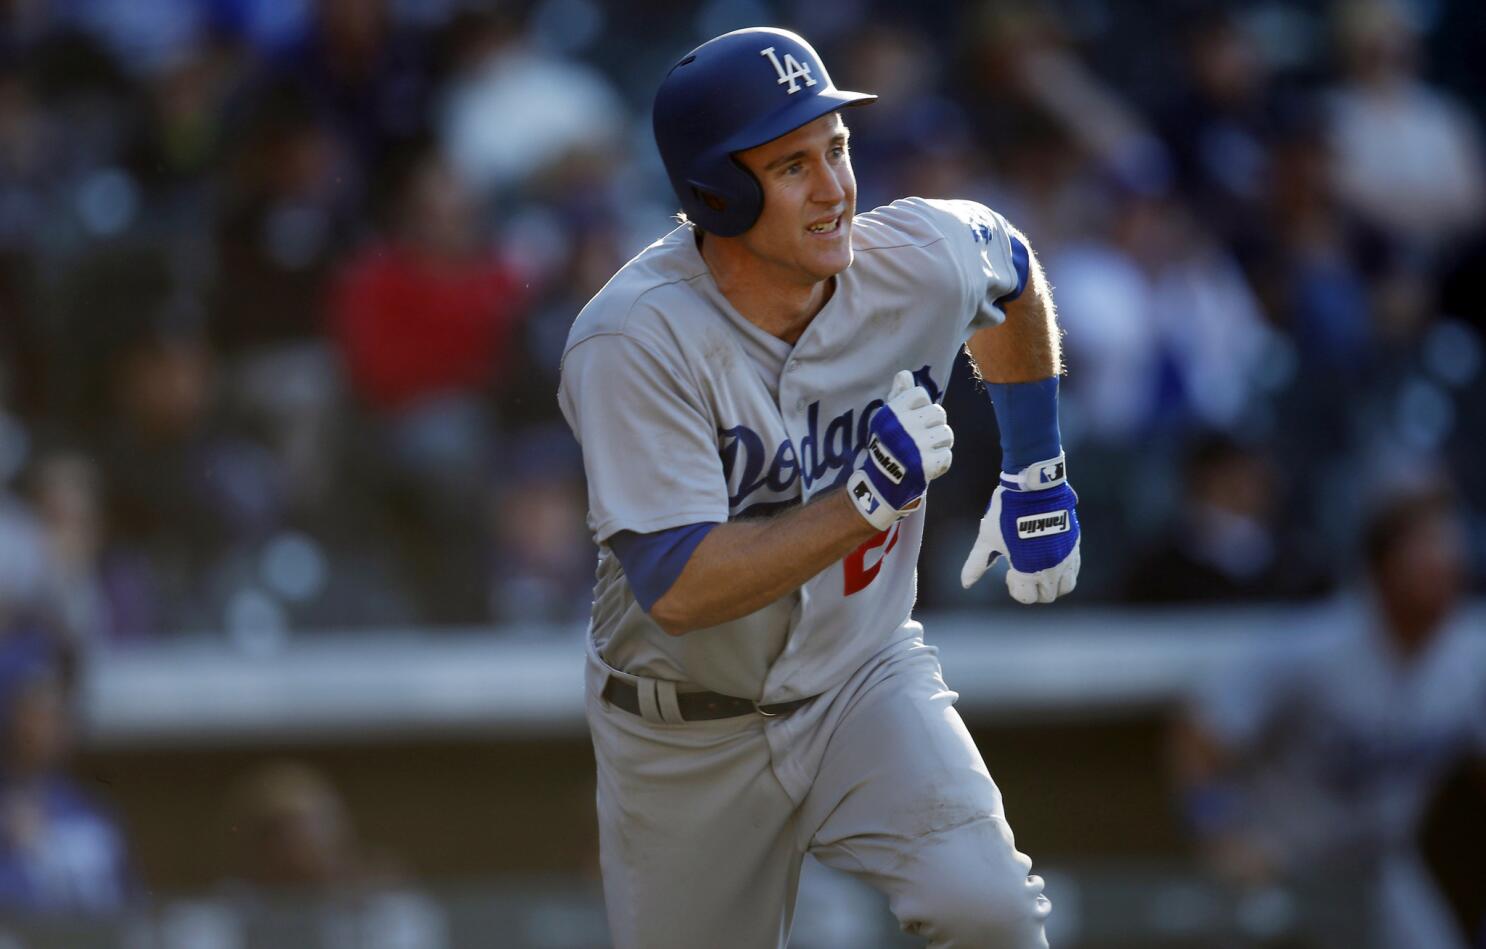 Chase Utley, you are the man!